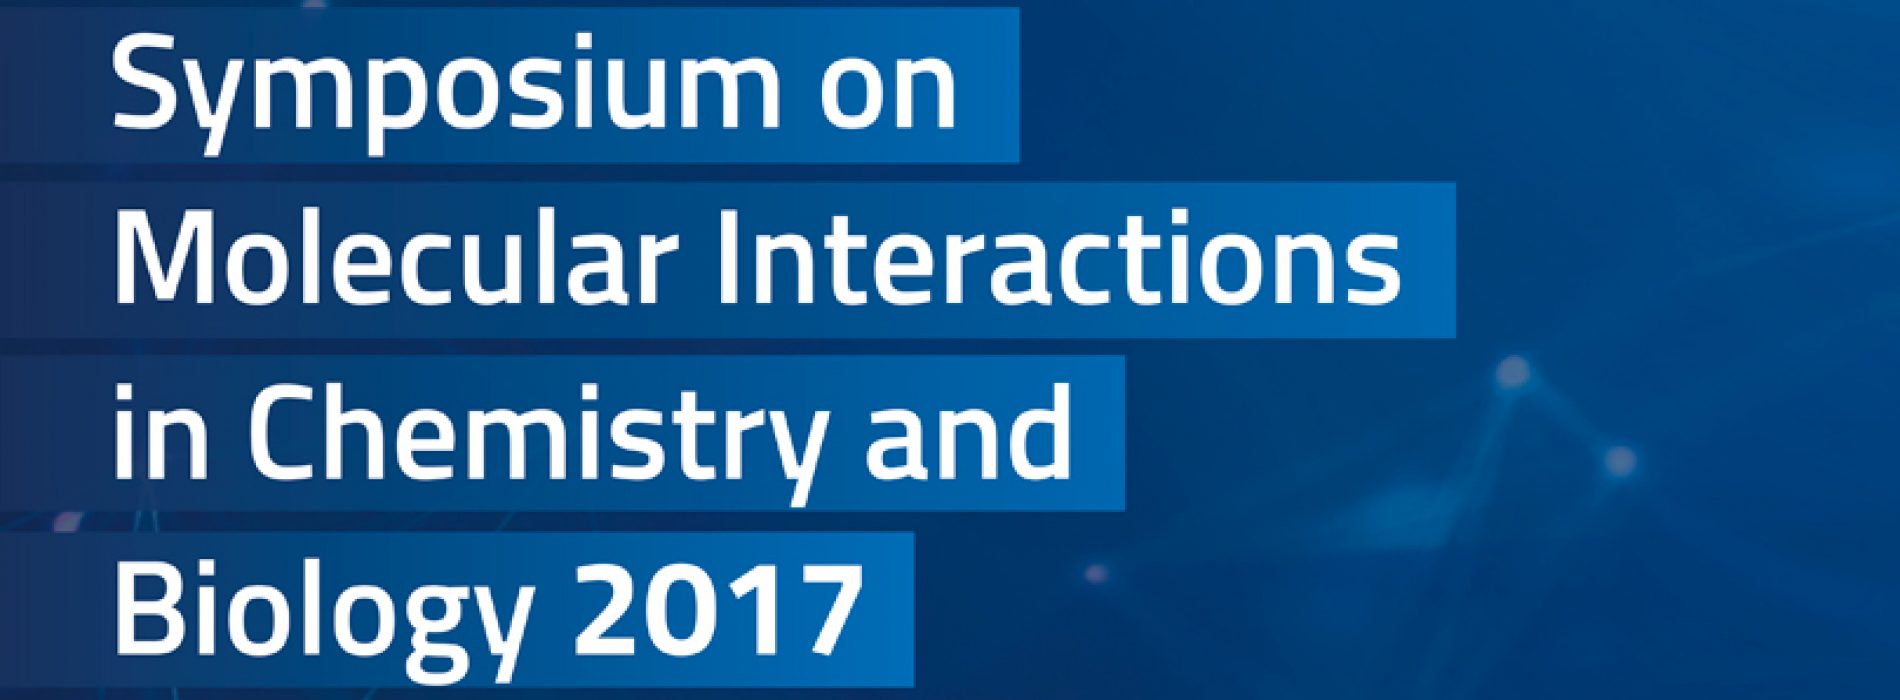 Symposium on Molecular Interactions in Chemistry and Biology 2017